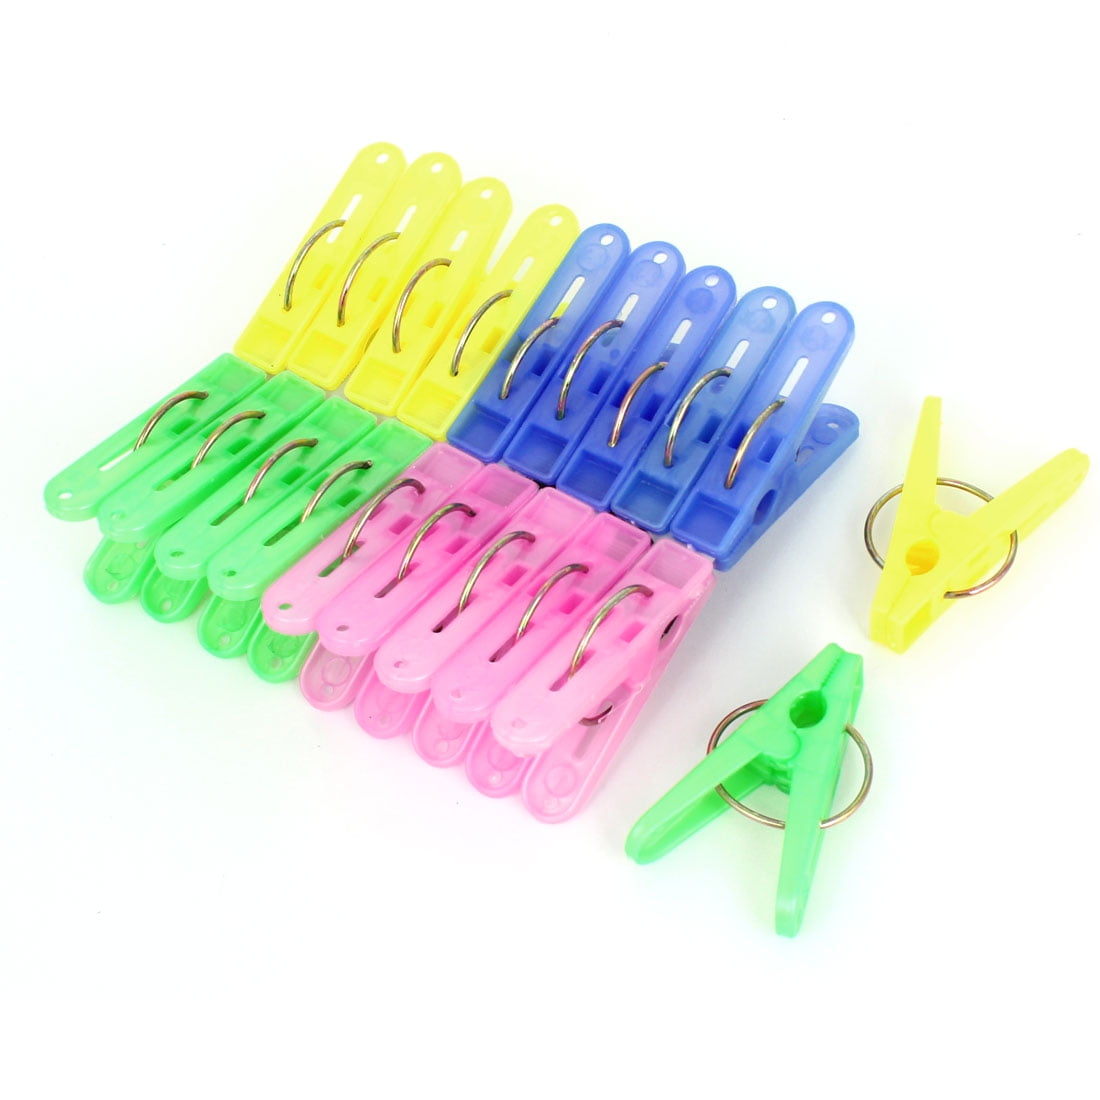 Rovedcity 90 PCS Colored Clothespins Small,Clothes Pins Rainbow Colorful 2  Inch Windproof Clips for Sock, Laundry Clothes with Spring, 9 Colors Each